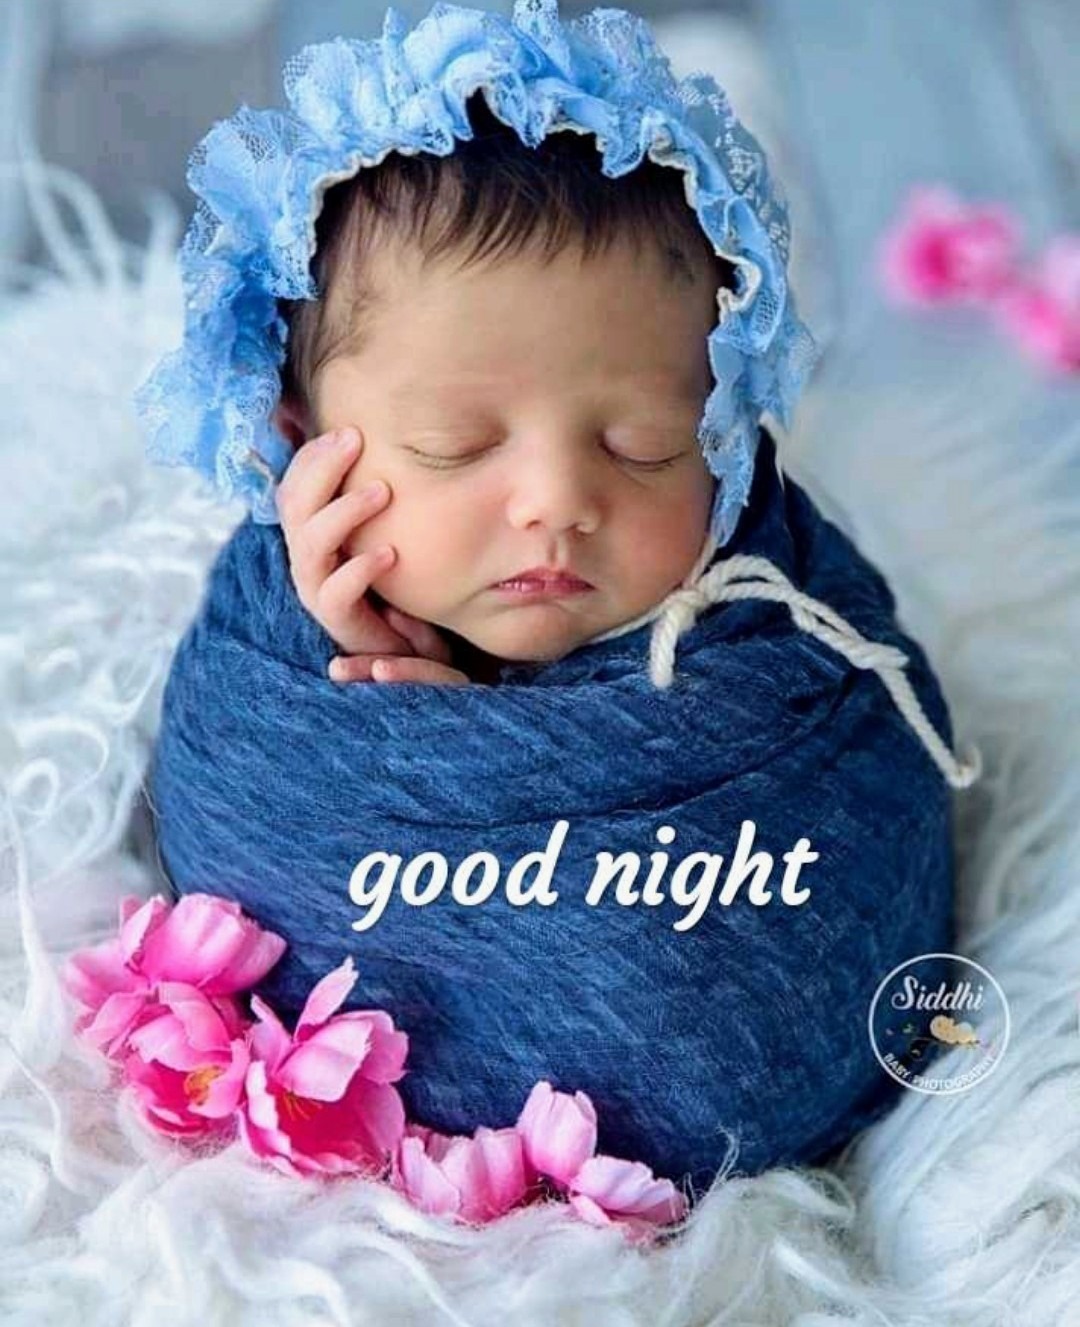 Good Night With Cute Baby - DesiComments.com